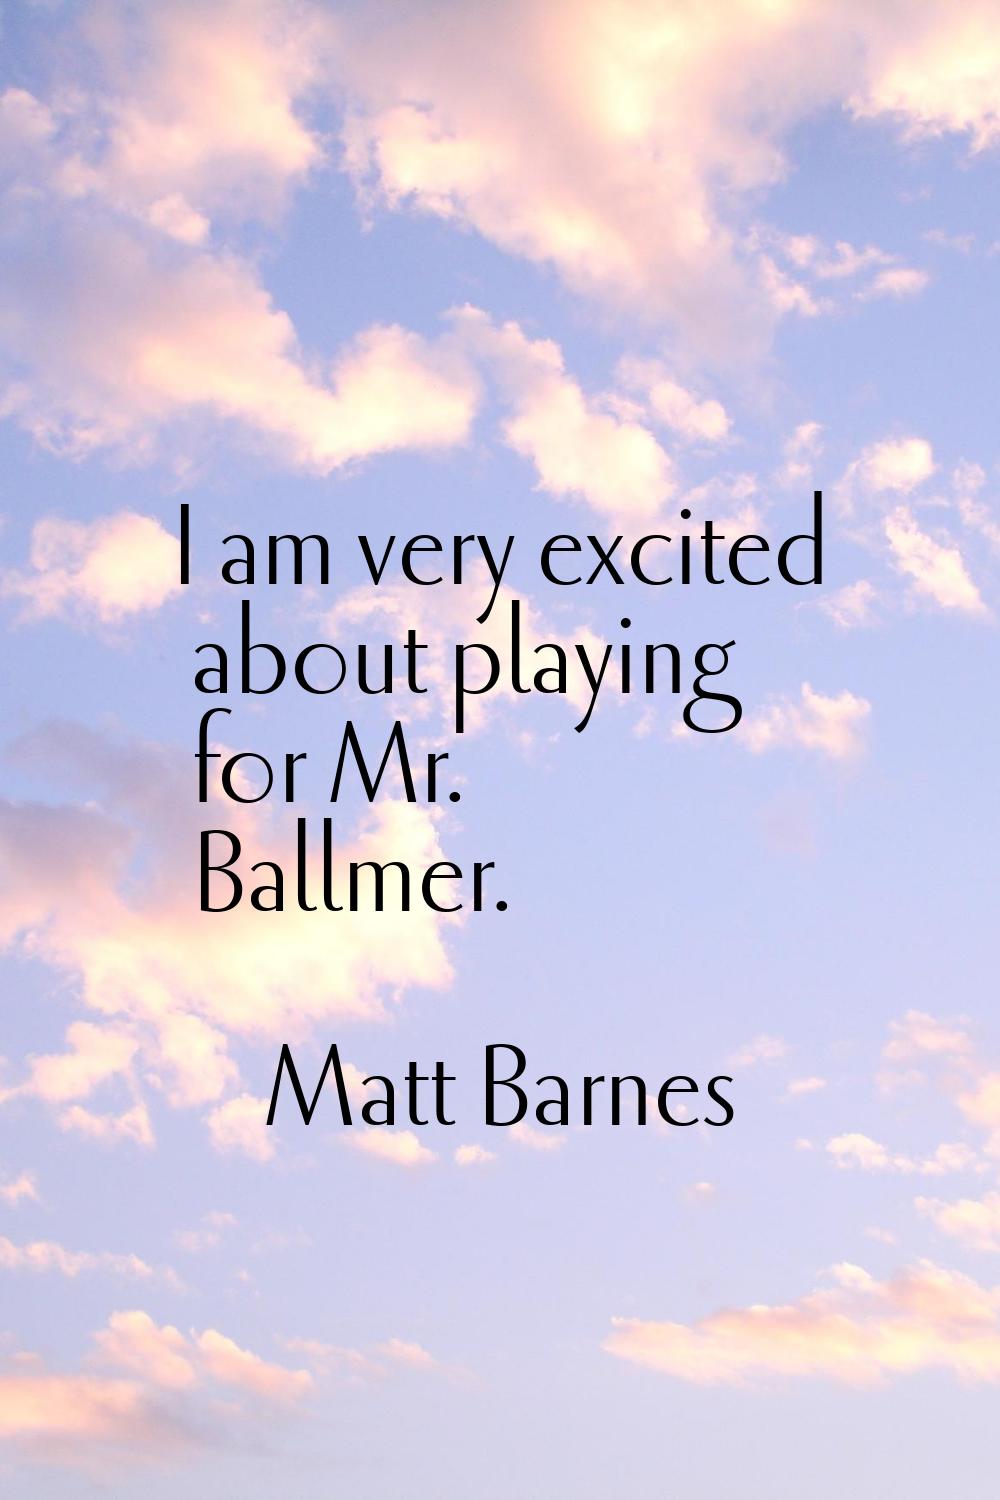 I am very excited about playing for Mr. Ballmer.